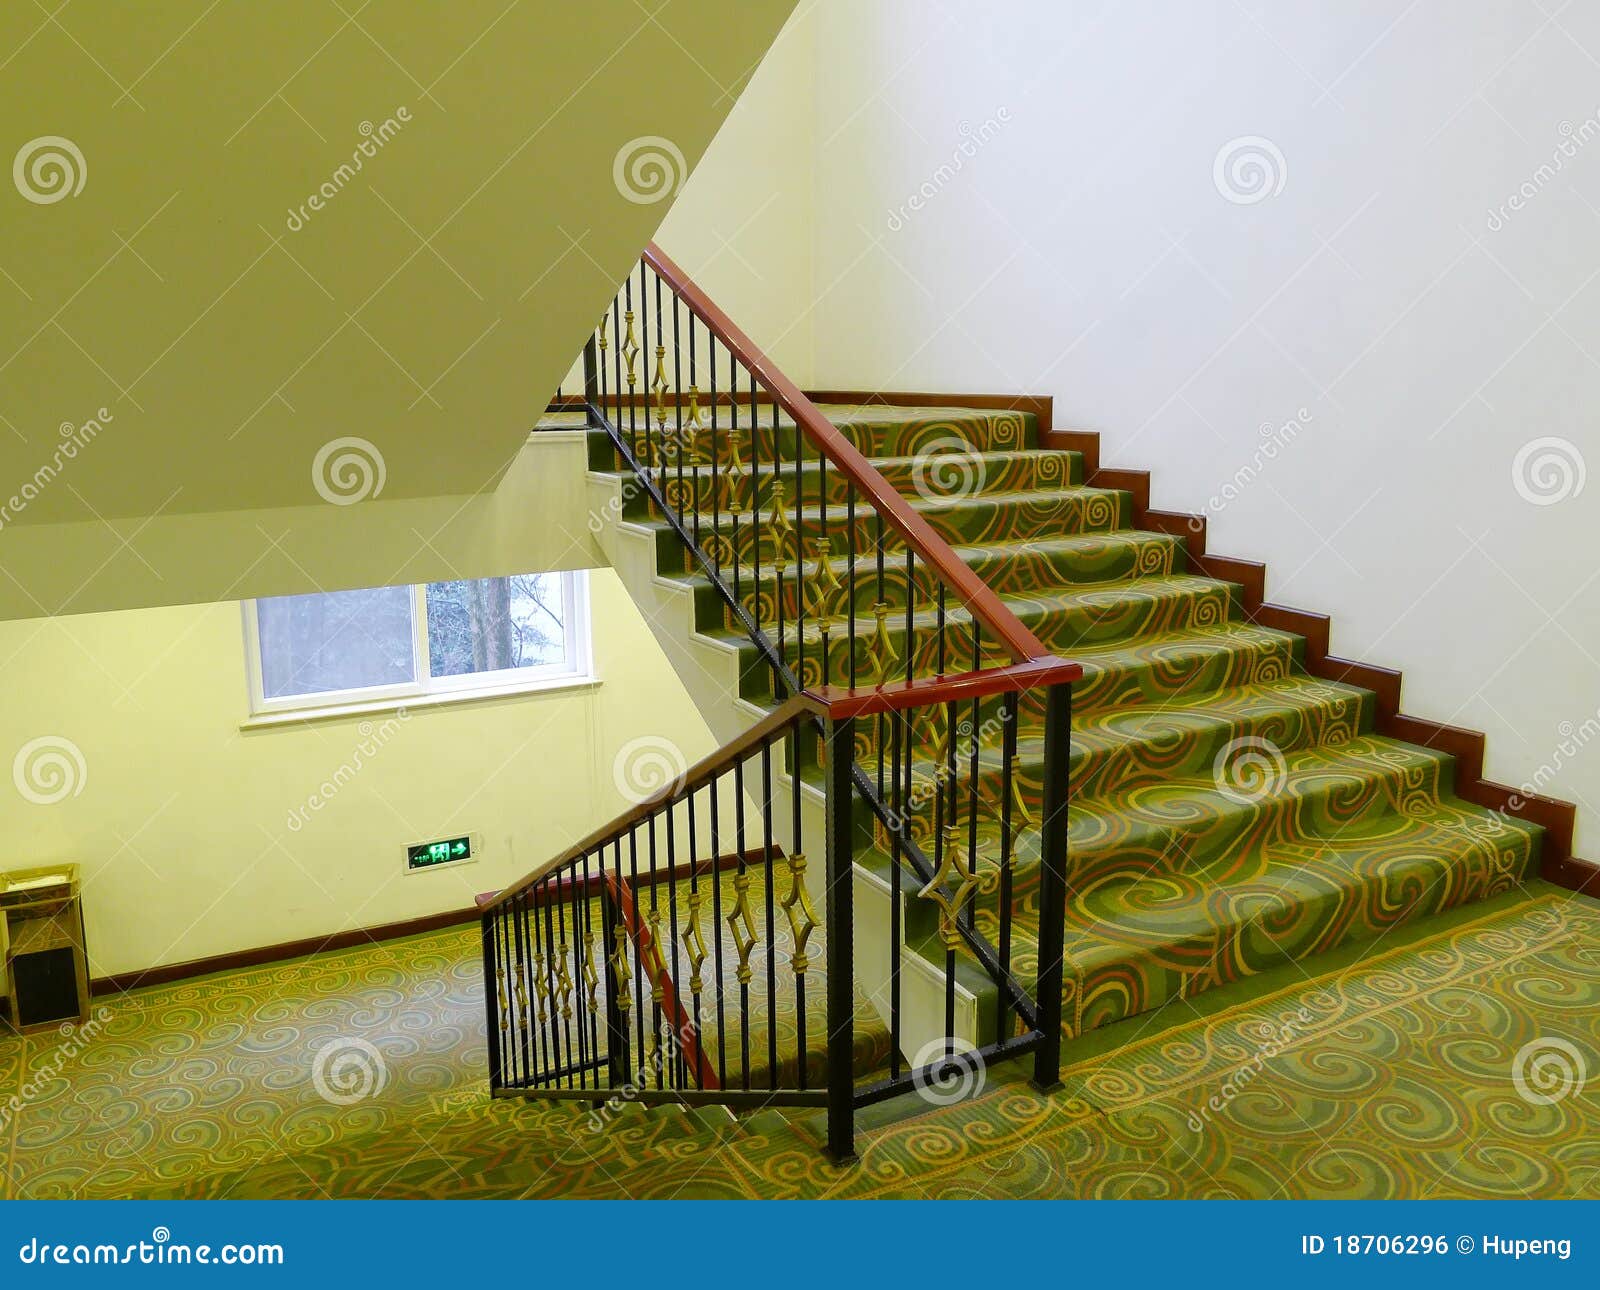 Stairs In The Hotel Royalty Free Stock Image - Image: 18706296